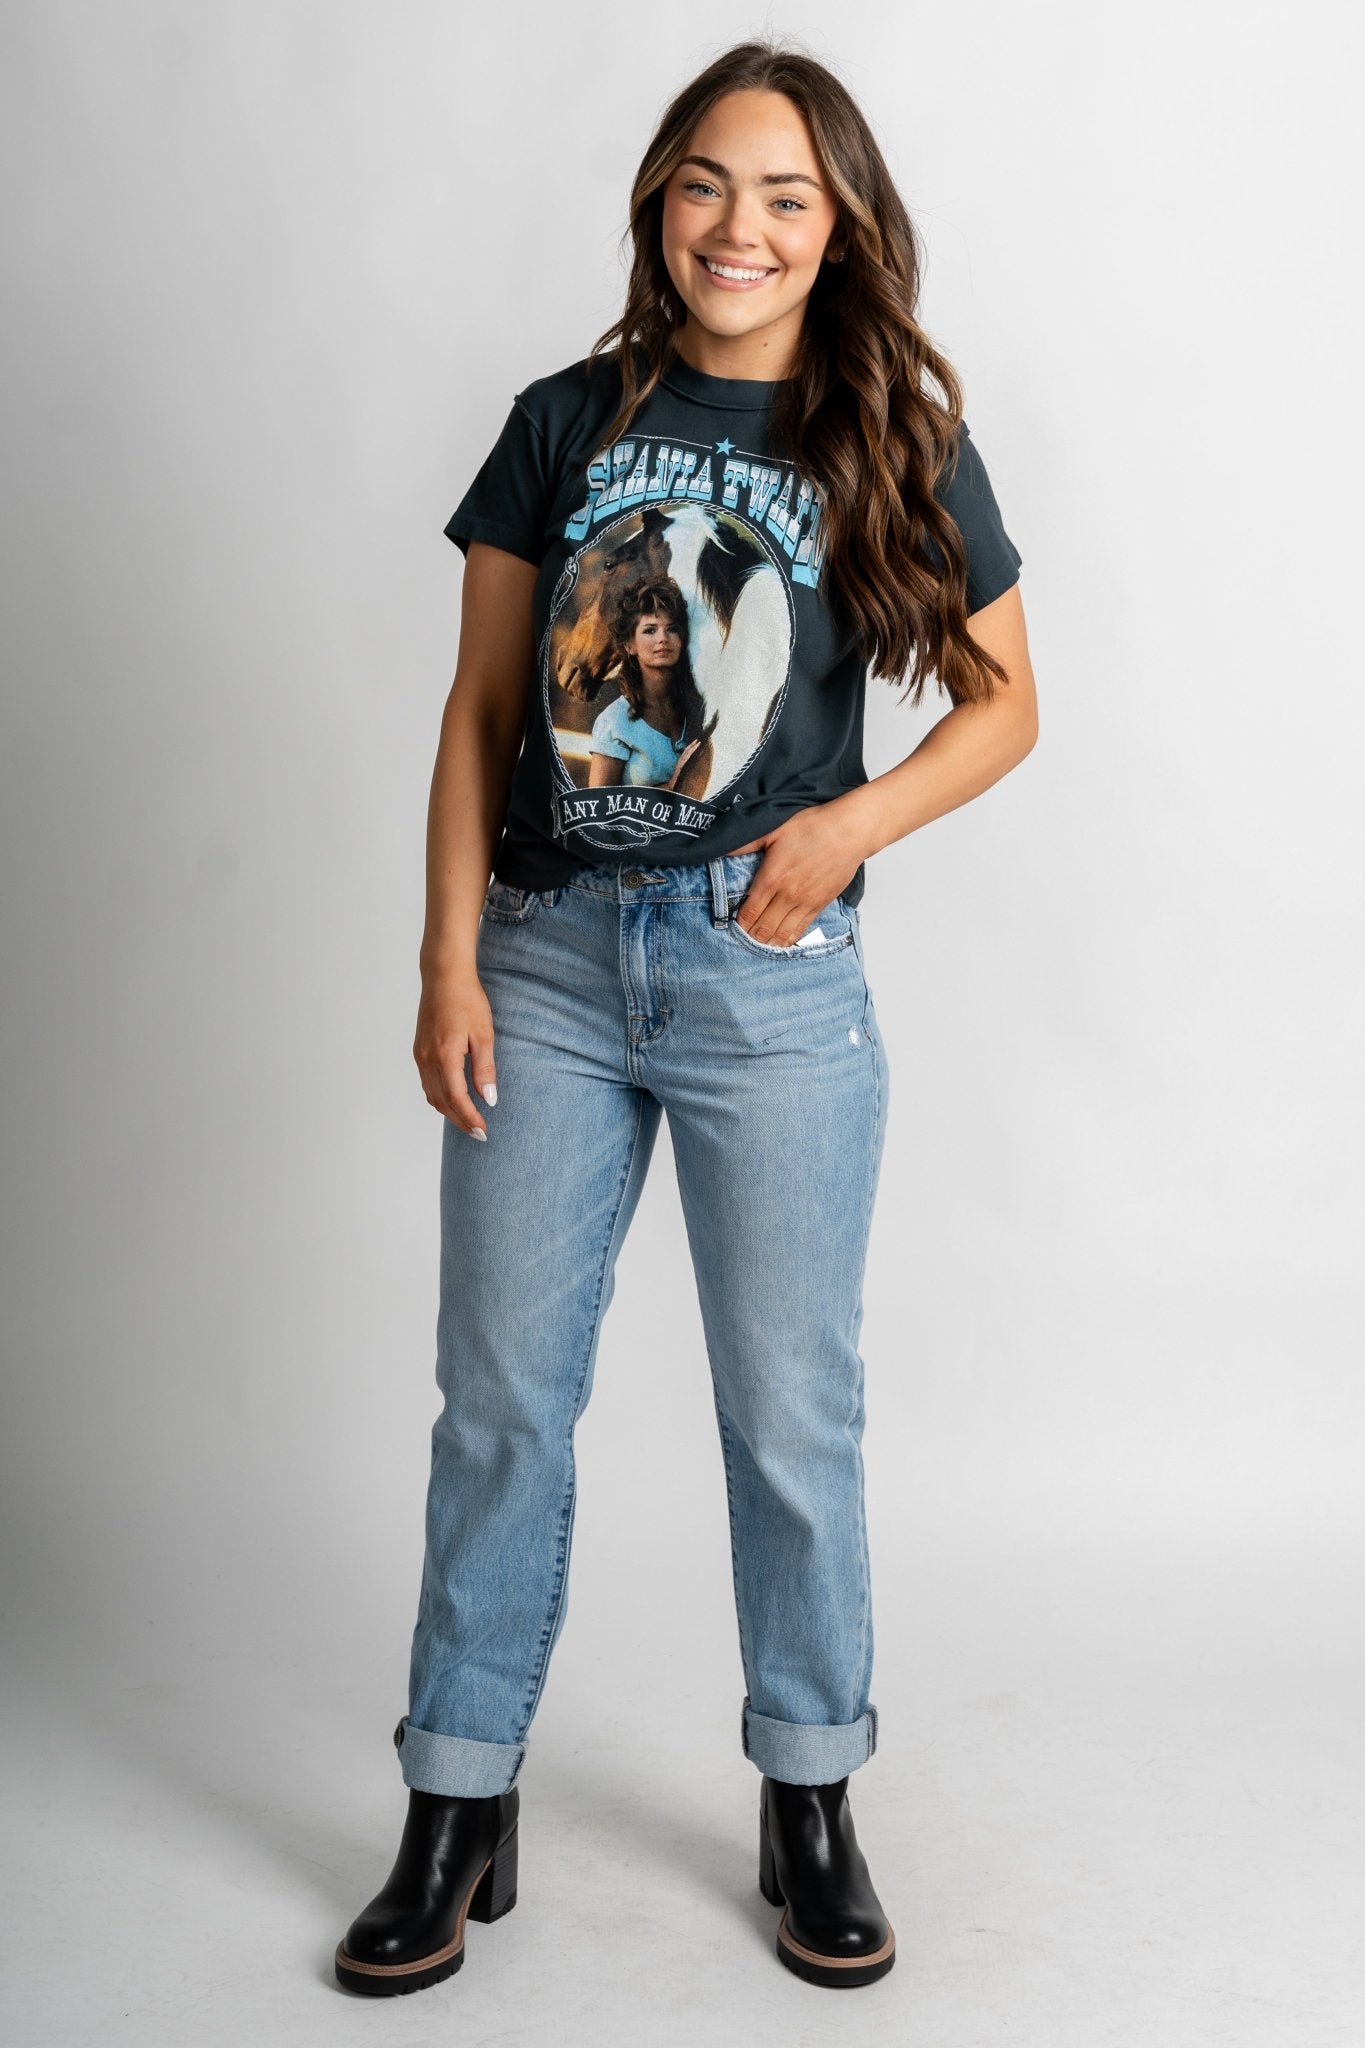 DayDreamer Shania Twain any man of mine tee vintage black - Vintage Band T-Shirts and Sweatshirts at Lush Fashion Lounge Boutique in Oklahoma City